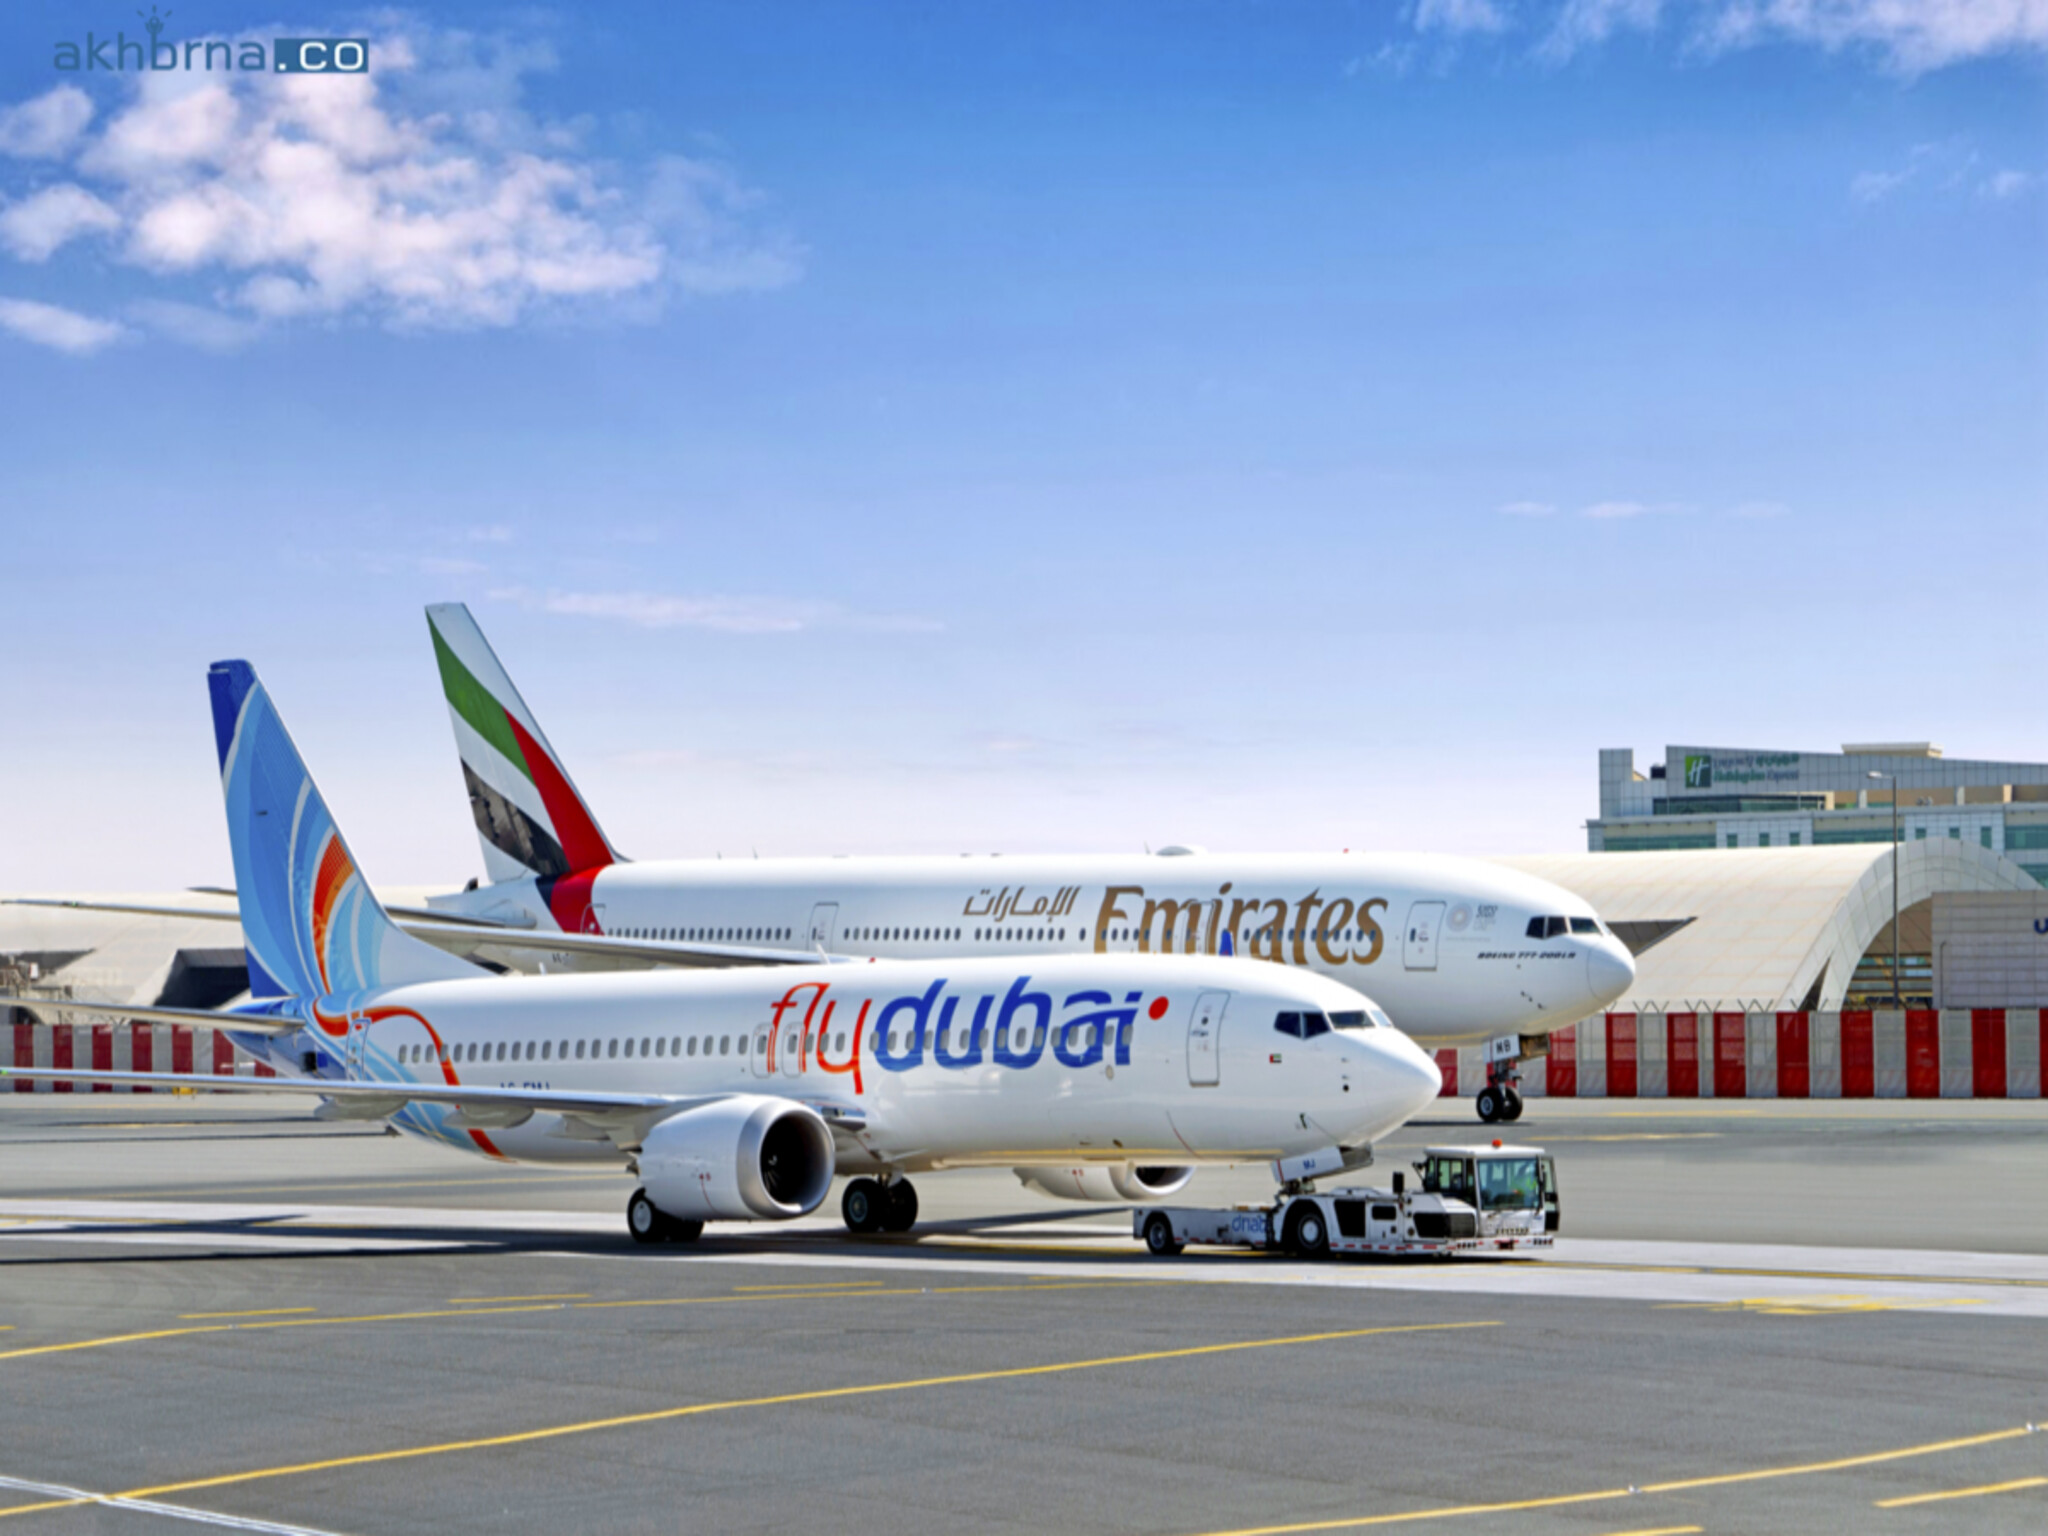 UAE: "Emirates Airlines" and "Flydubai" schedule 4.36 Mn seats for June flights